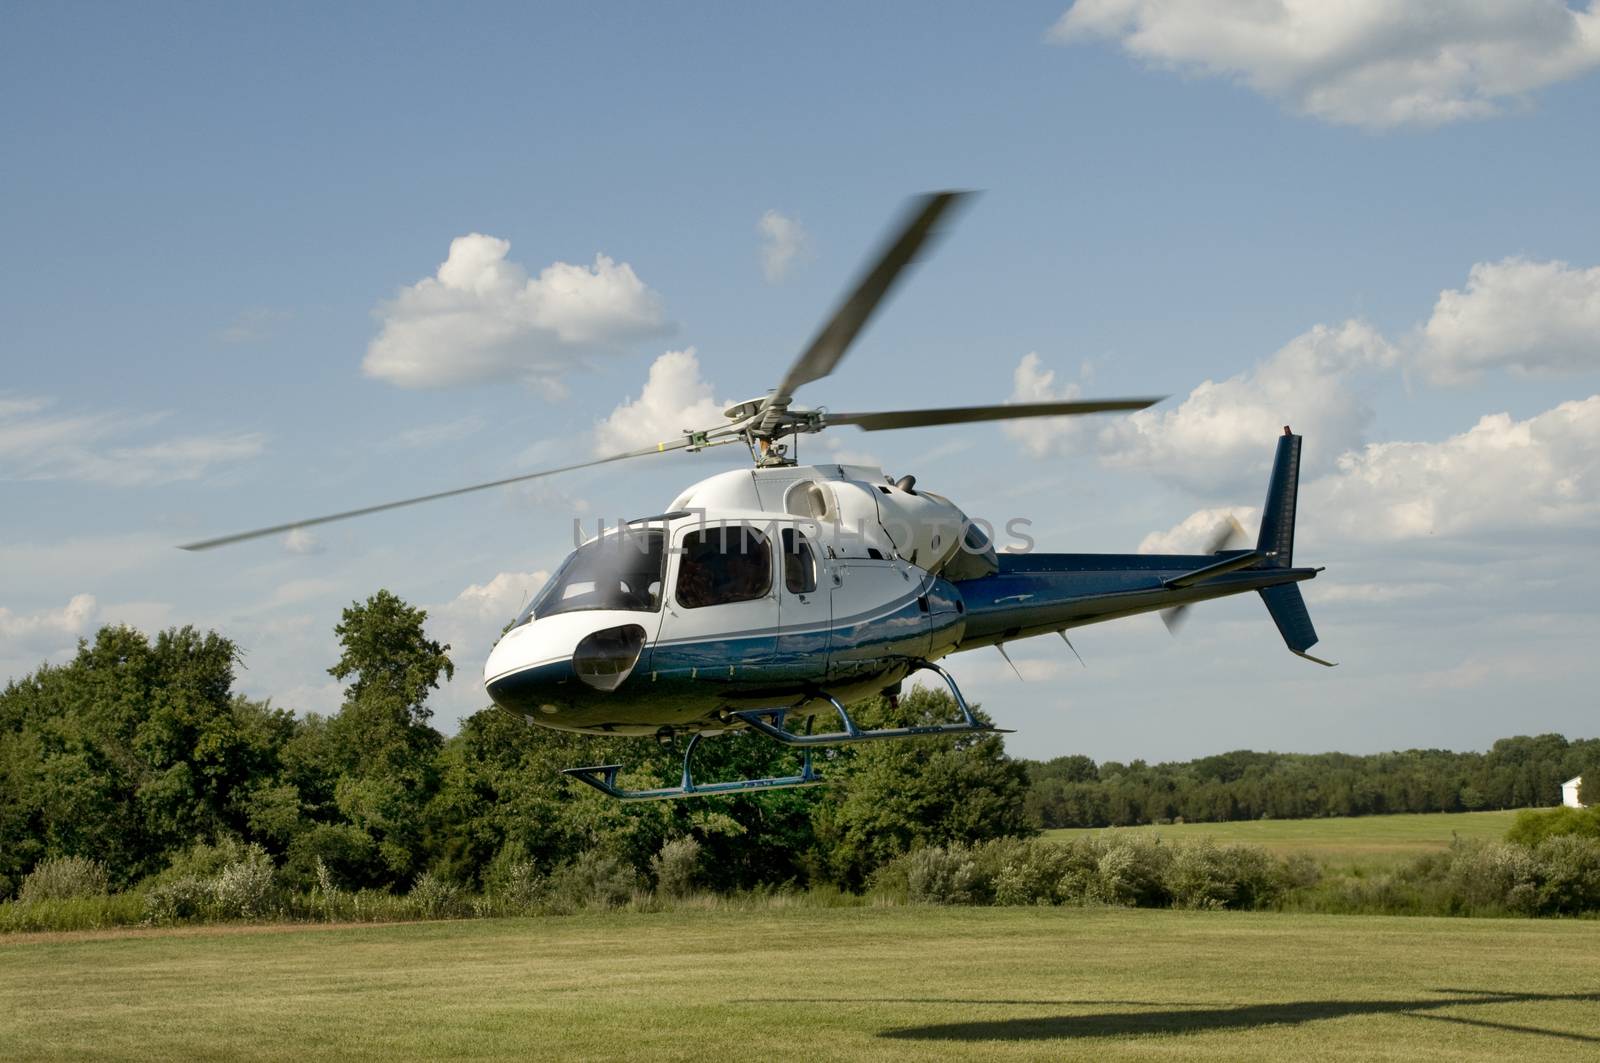 Blue and white helicopter taking off or landing in a field